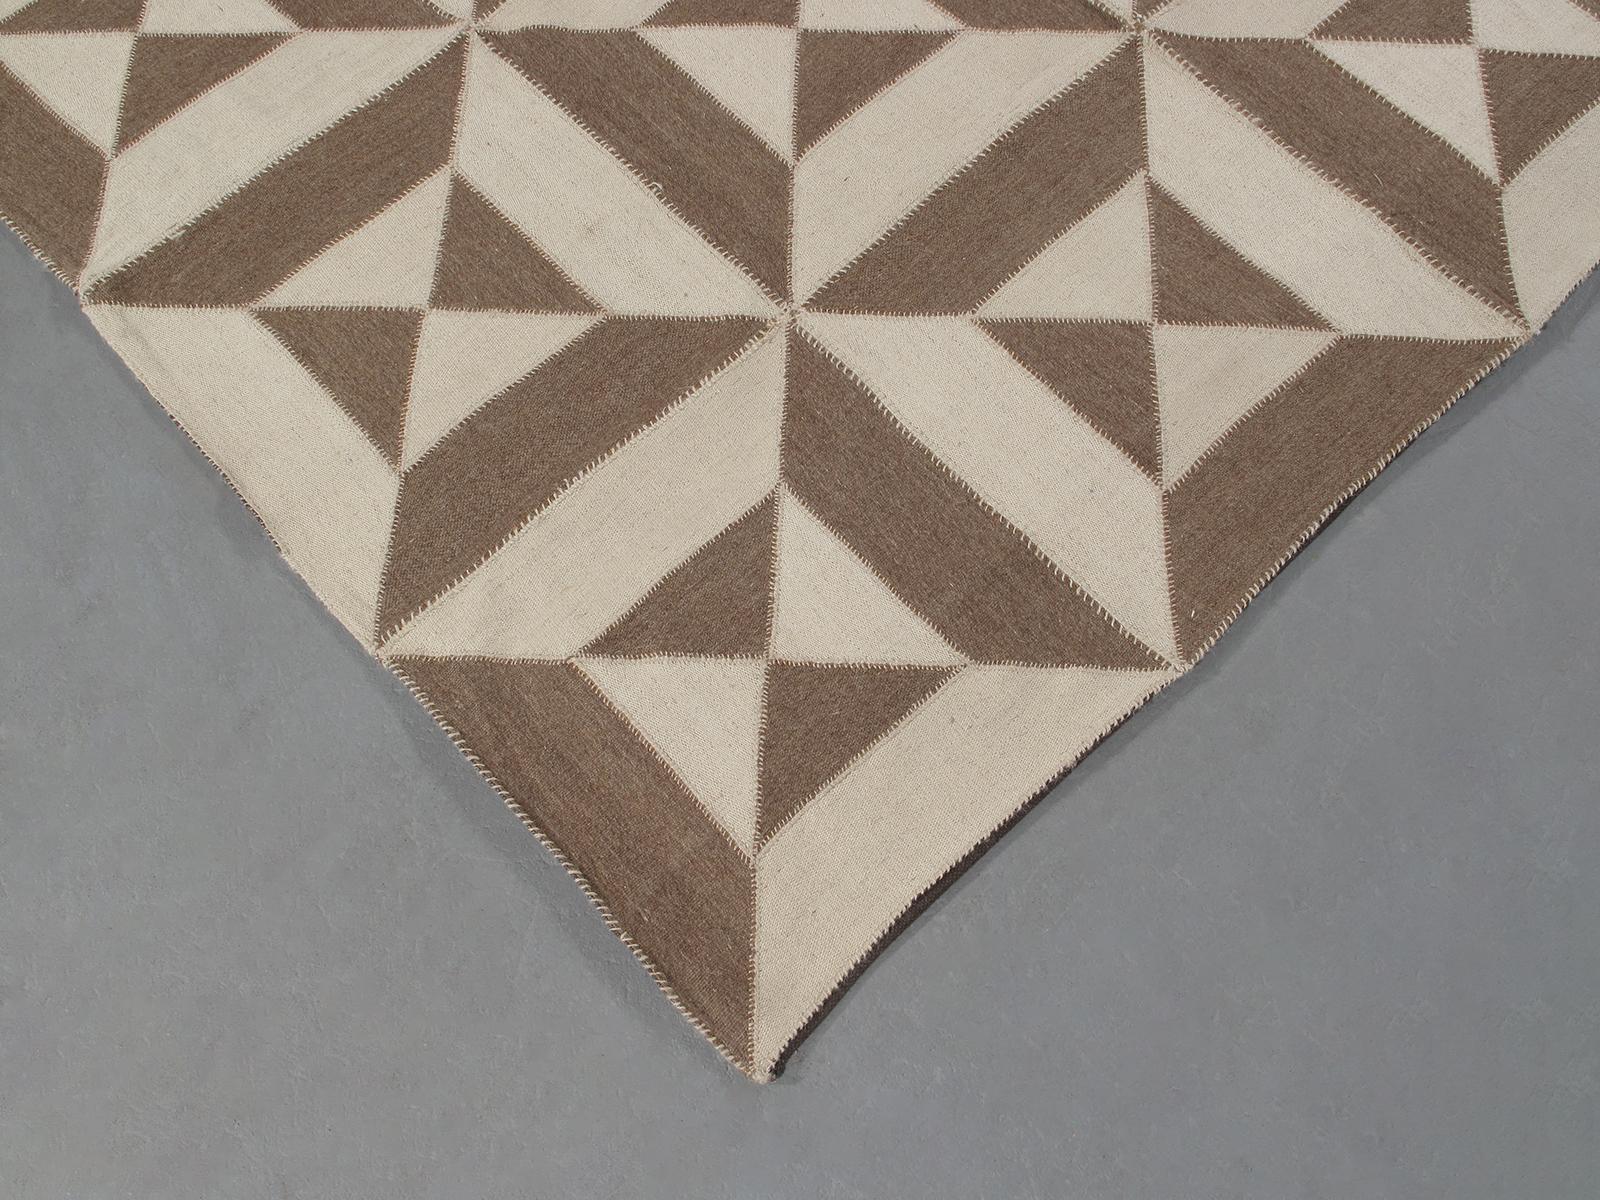 Modern Shiraz Handwoven Flatweave Geometric Square Rug in Beige and Brown In New Condition For Sale In New York, NY